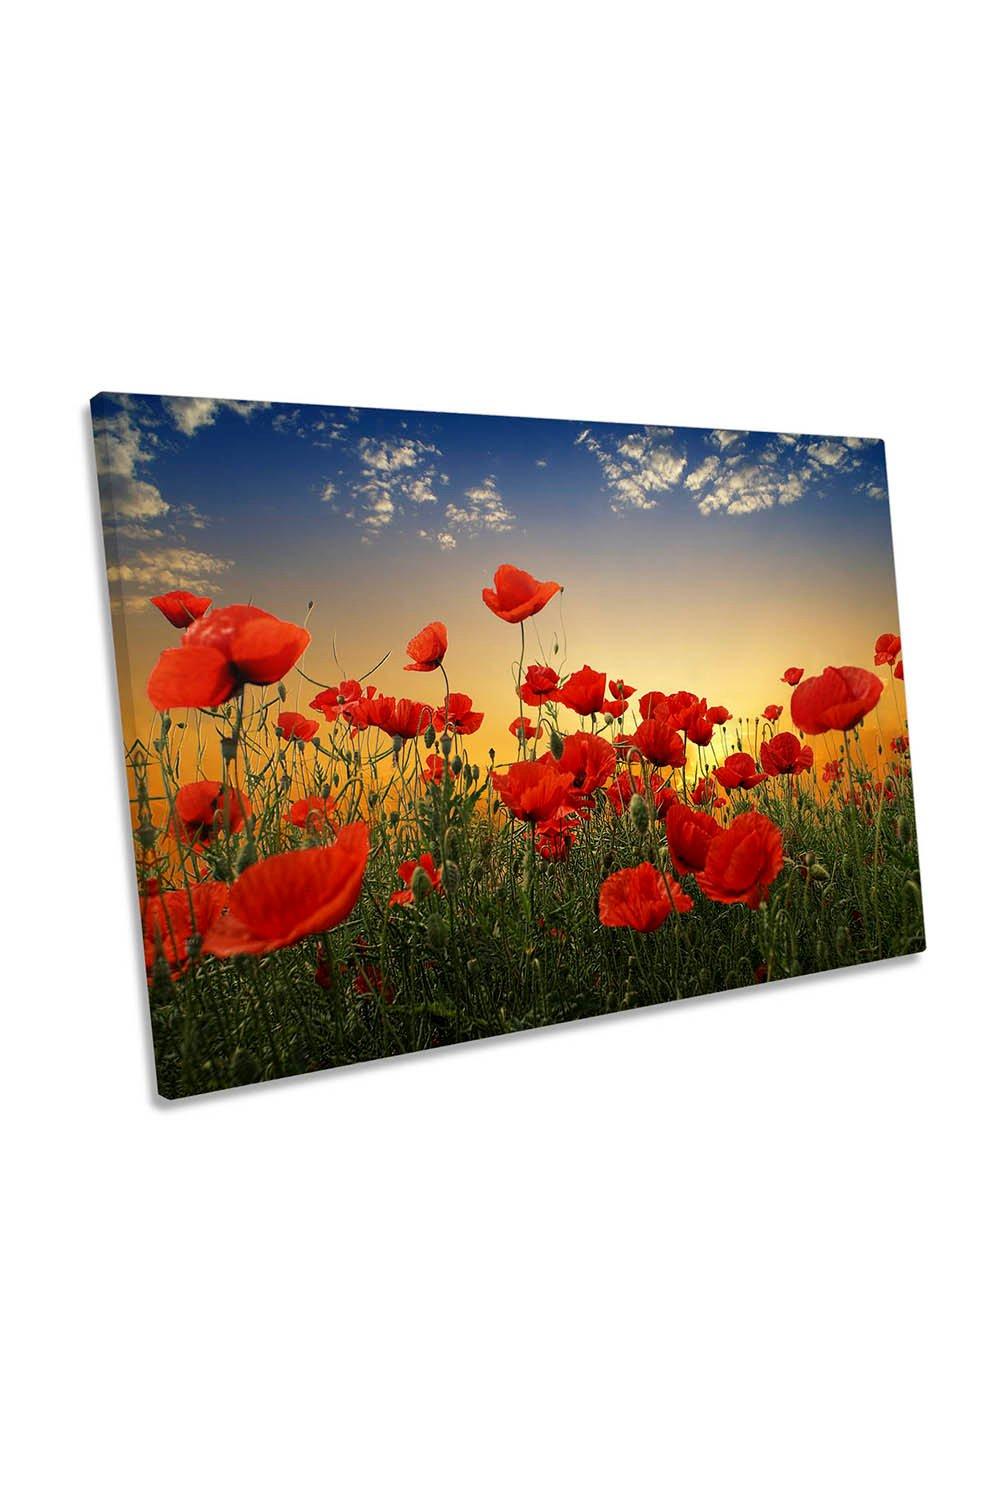 Red Poppies Flowers Floral Canvas Wall Art Picture Print